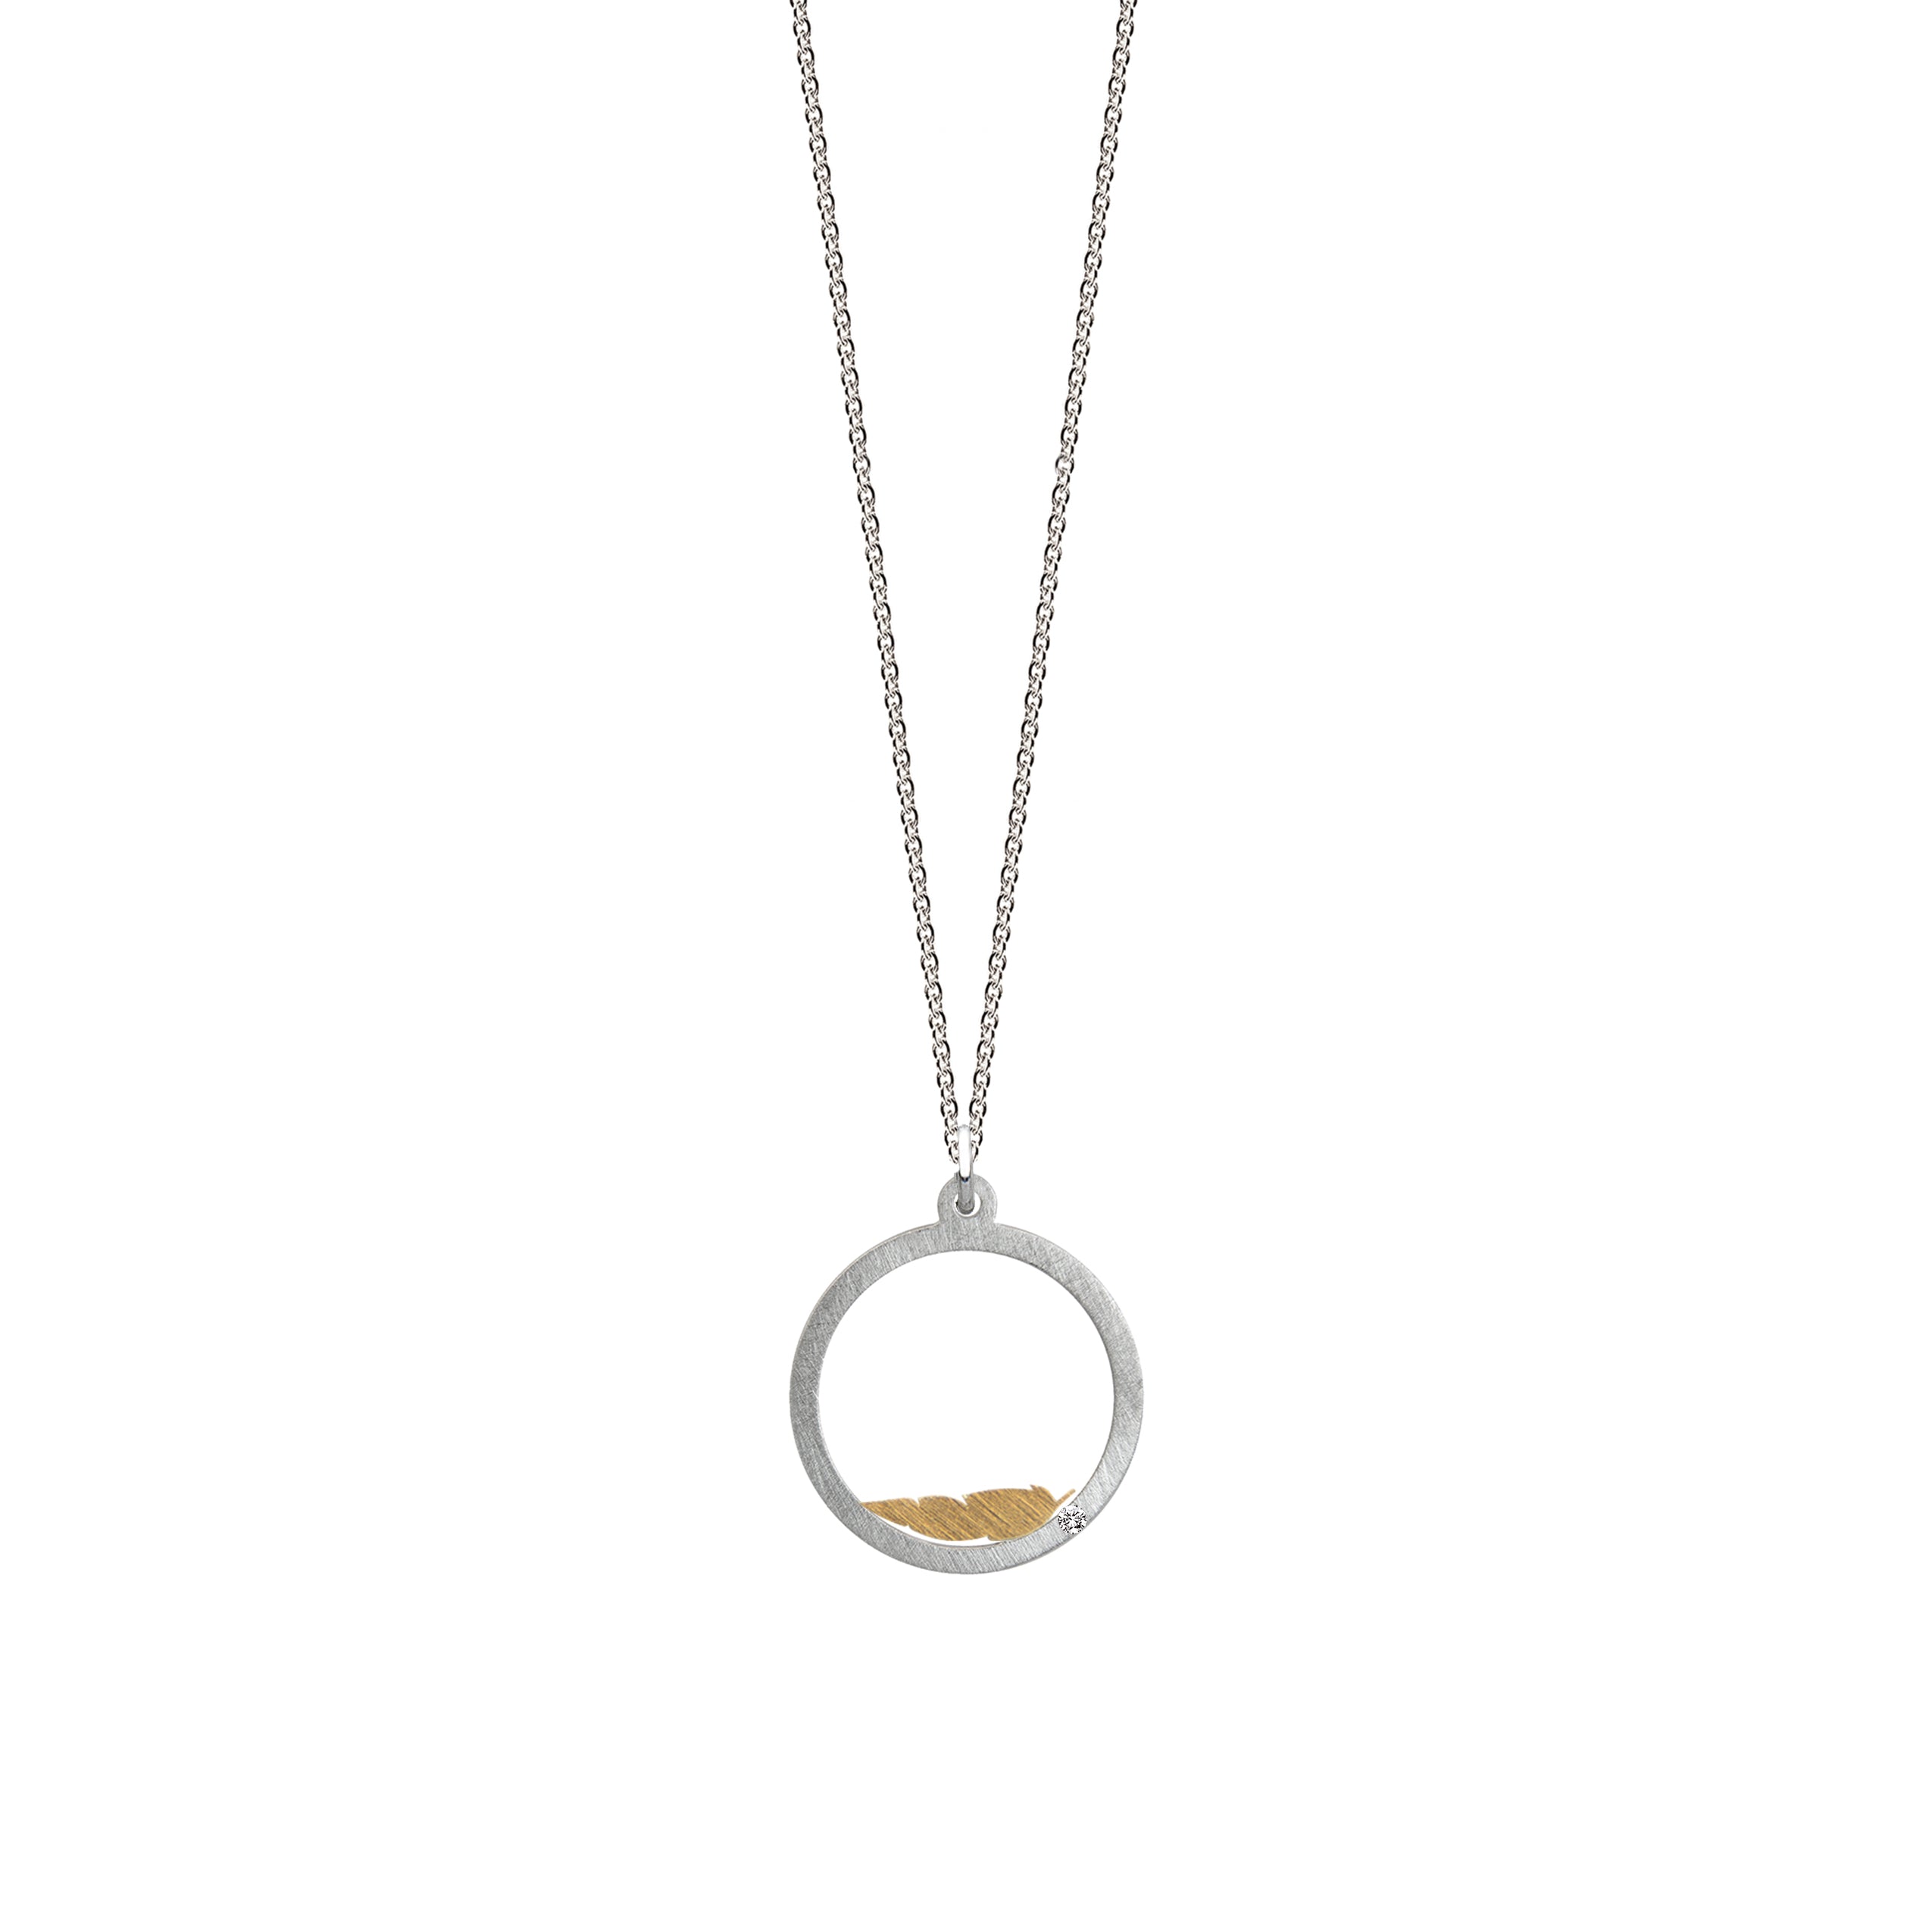 Intention pendant "COURAGE" with brilliant 0.007ct TWVS